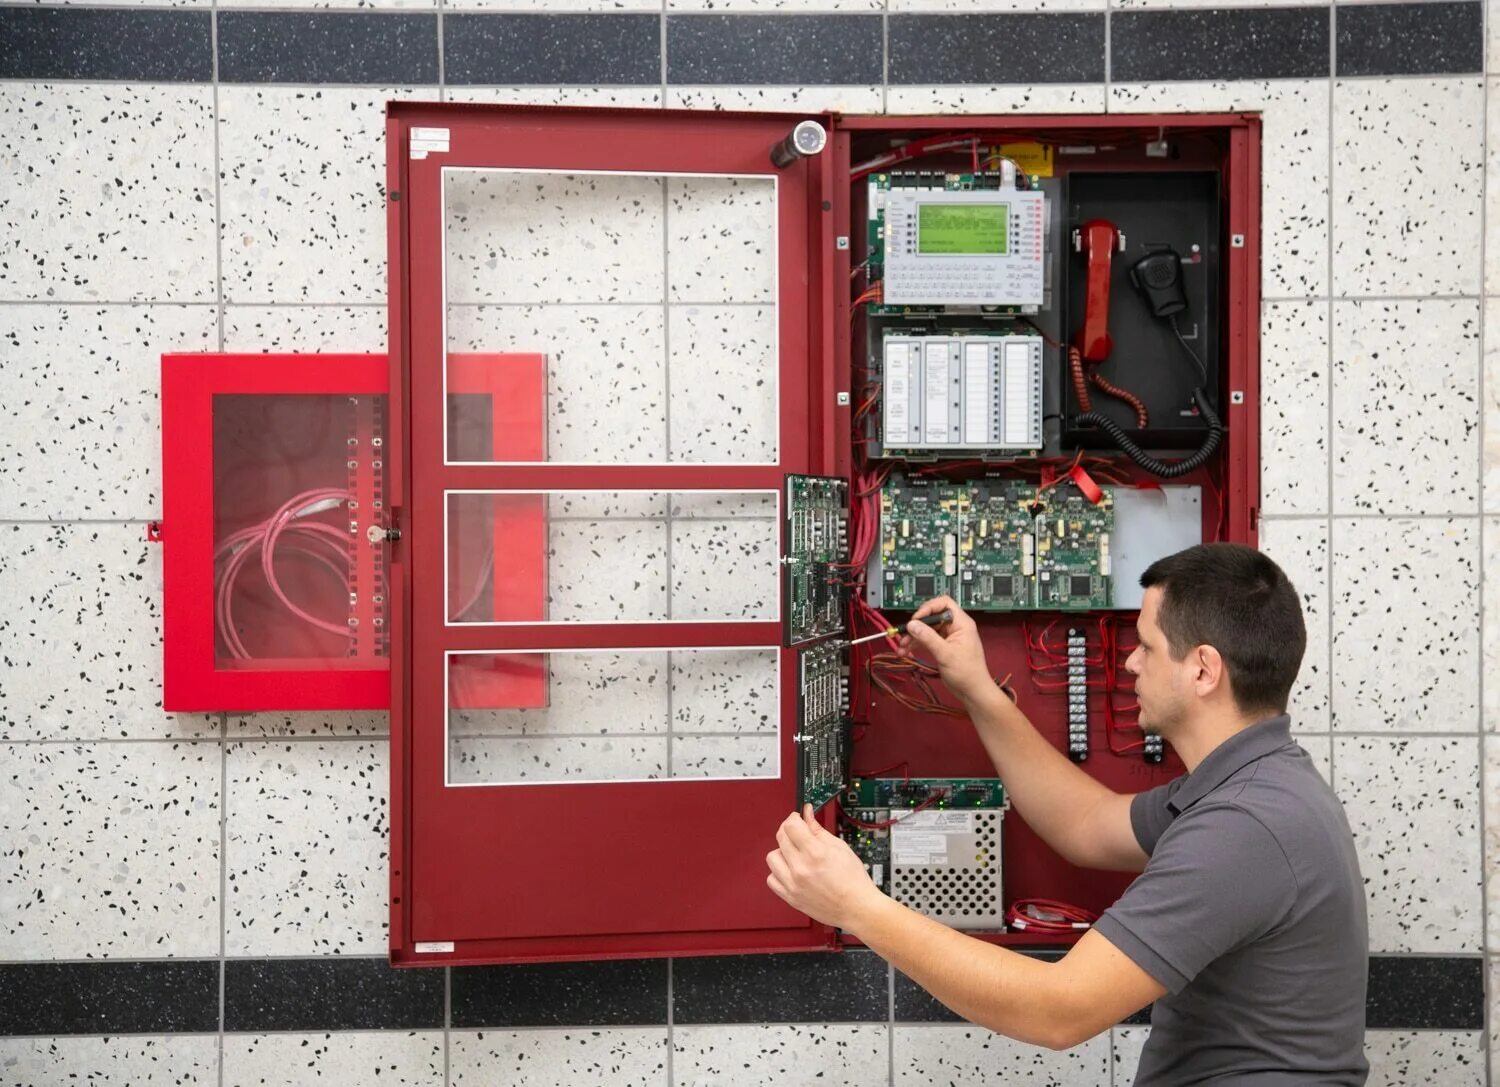 Fire Alarm System. ЧП "Fire Standard Systems". Protection Systems. 308 Systems Inc.